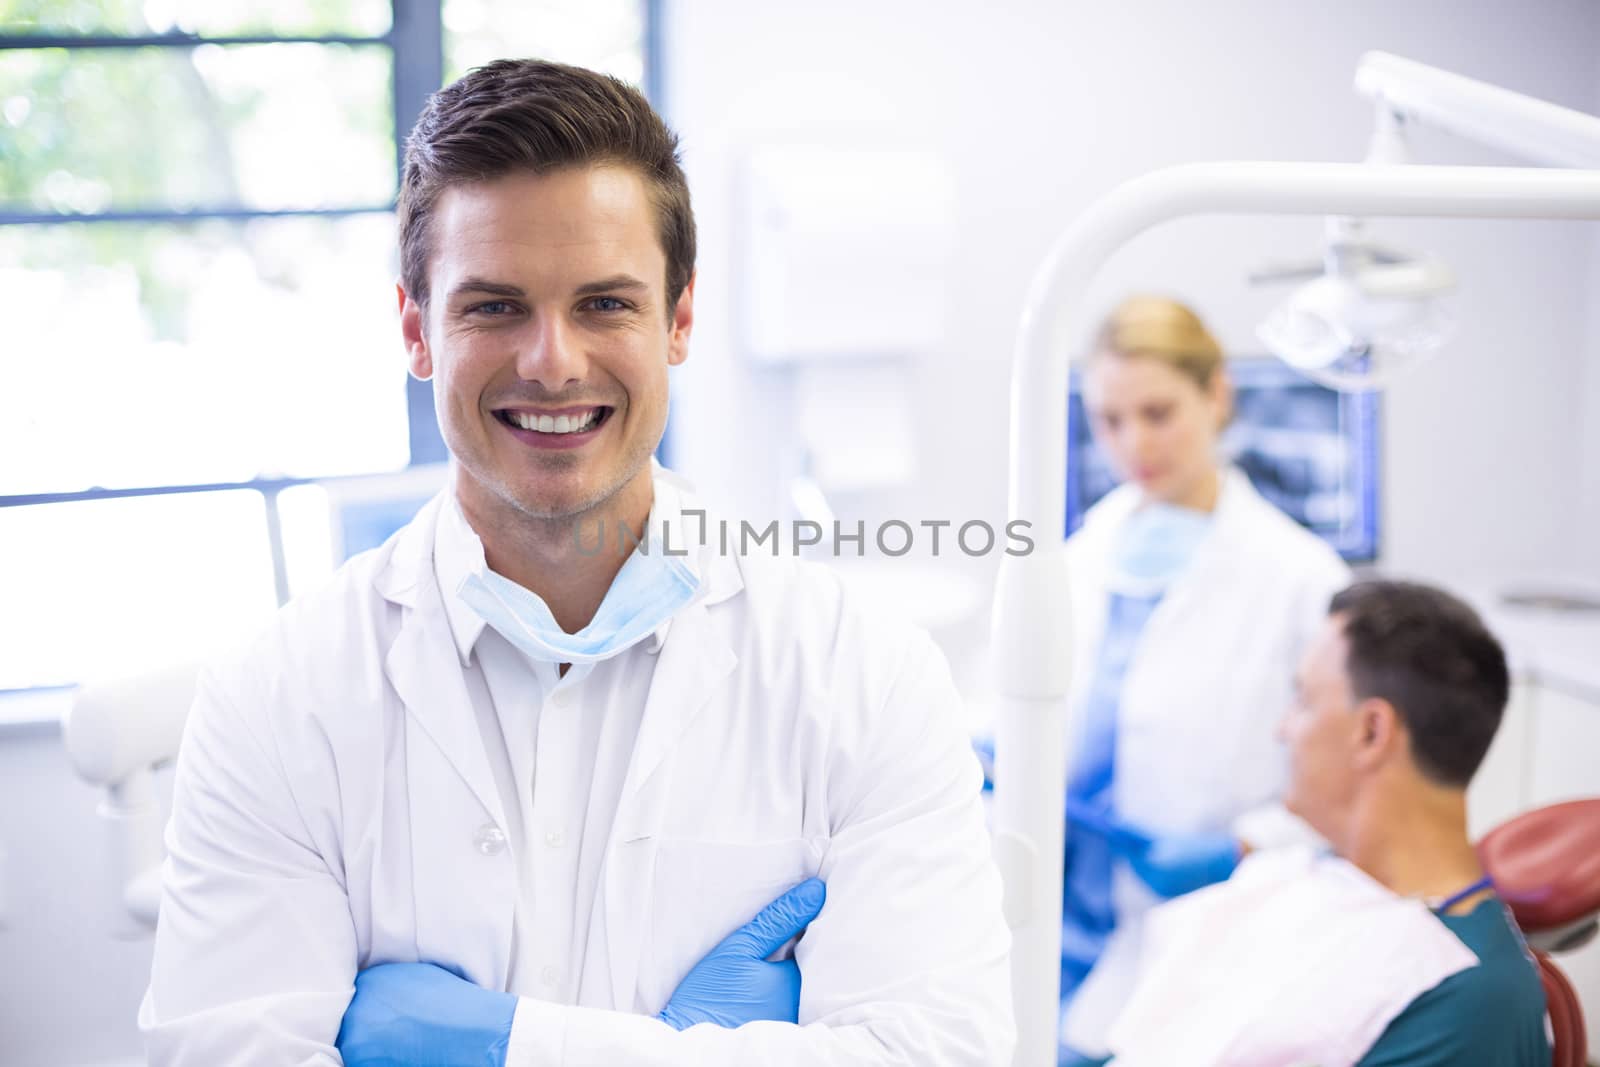 Portrait of dentist standing with arms crossed while his colleague examining patient in background